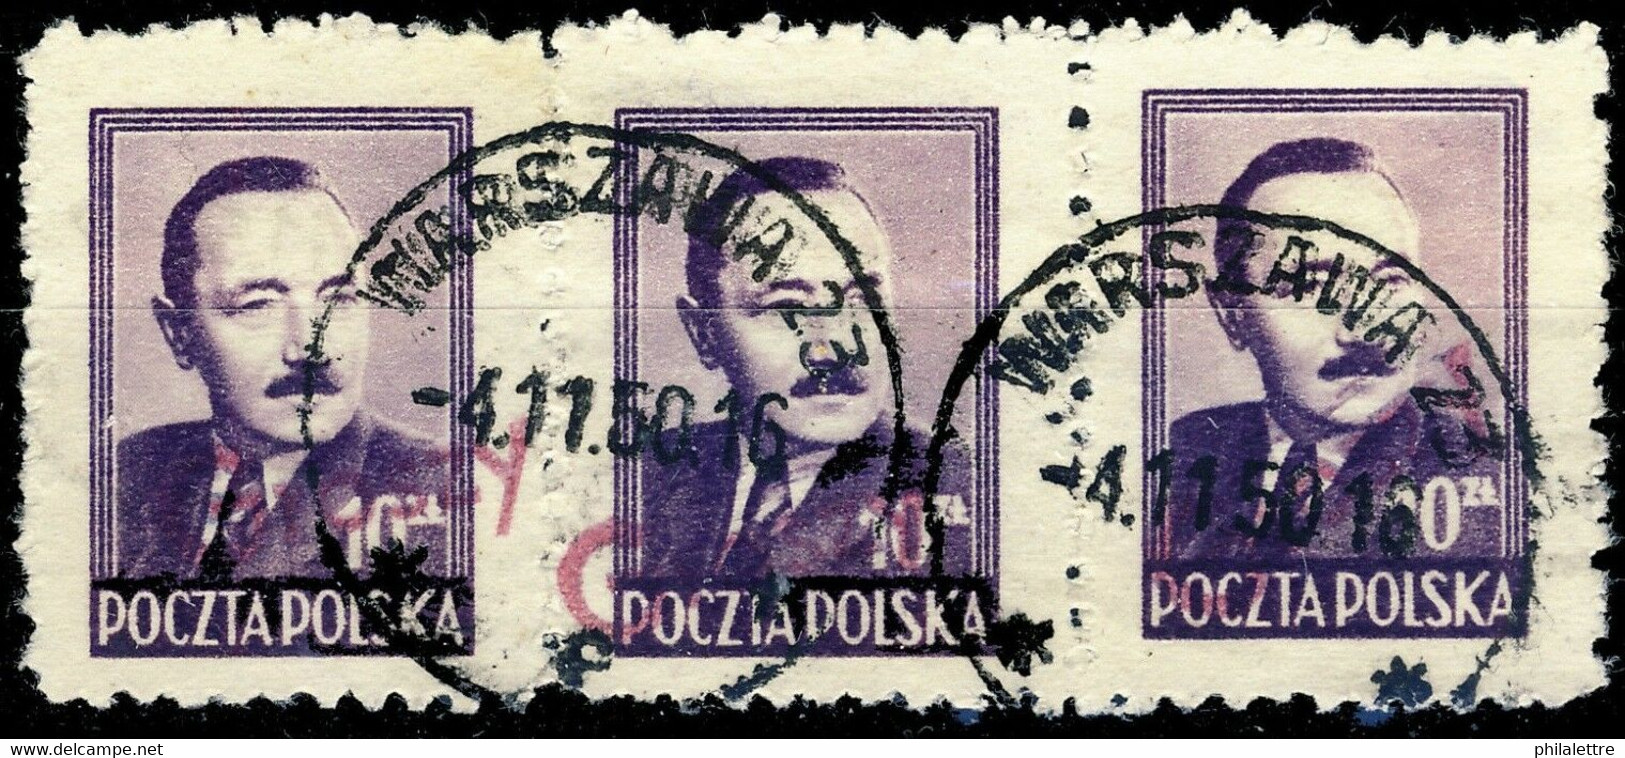 POLOGNE / POLAND 1950 GROSZY O/P T. 23 (Warsaw) 3xMi.625 V. EARLY USAGE NOV 4, 50 - Used Stamps